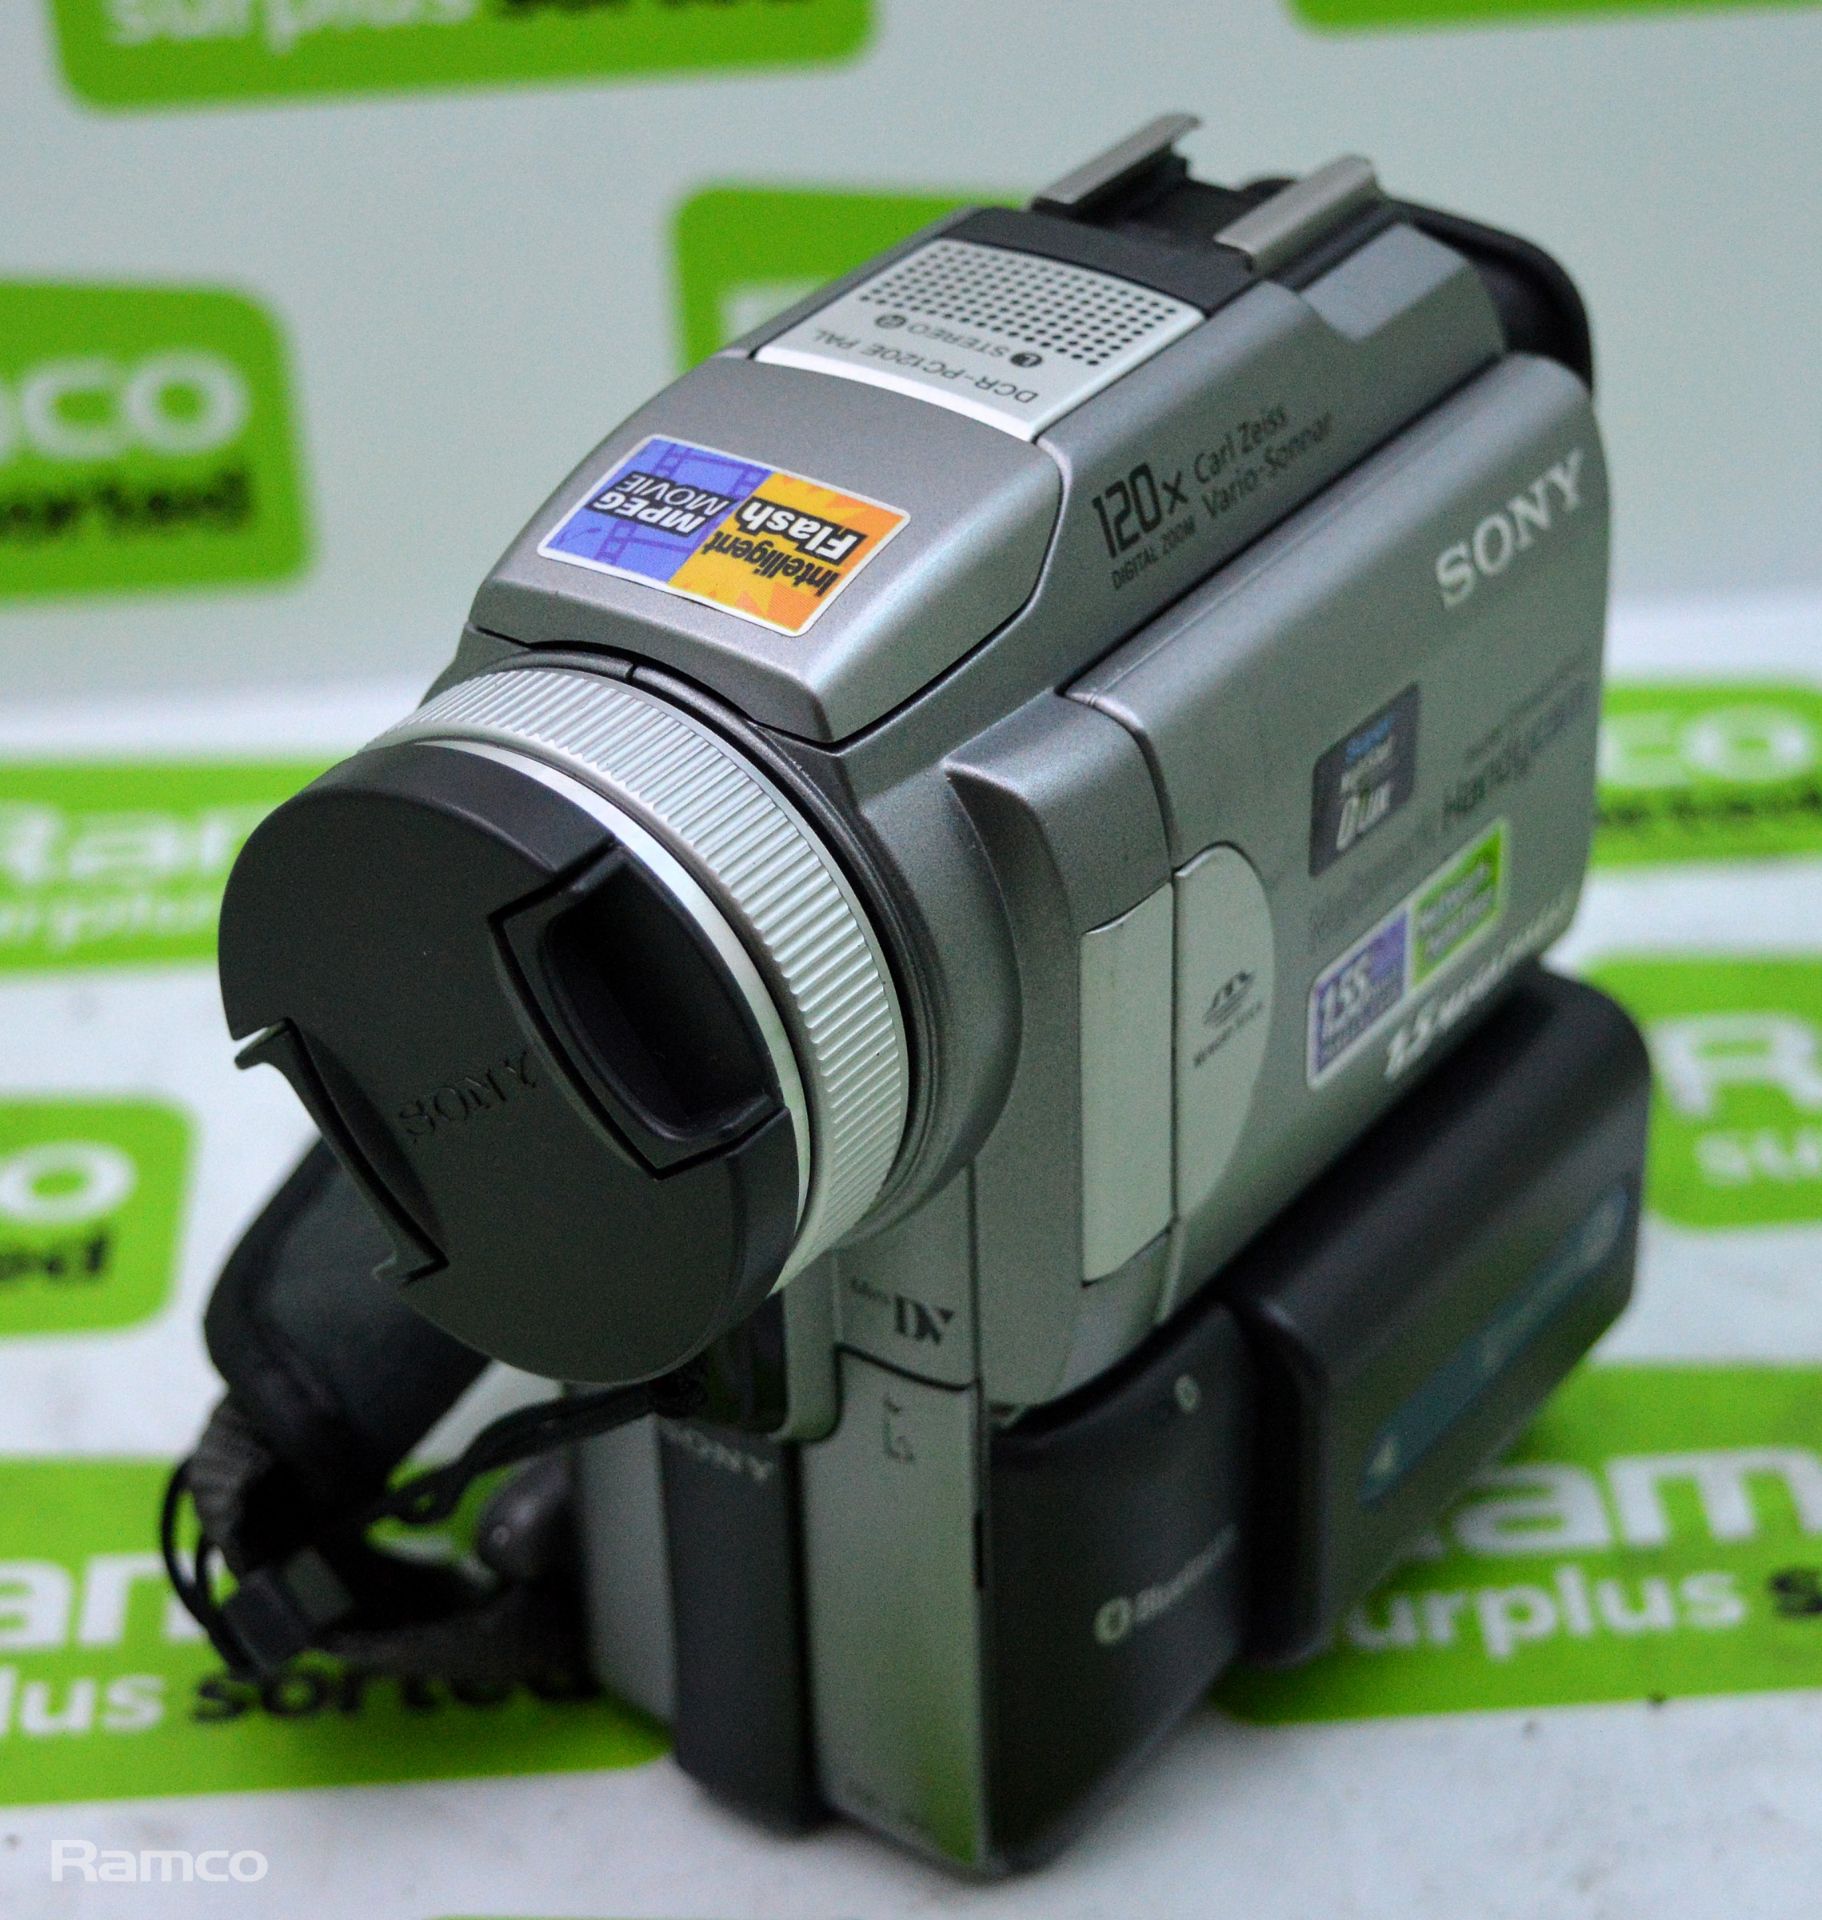 Sony DCR-PC120E Video Camcorder With Accessories In Case - Image 3 of 6